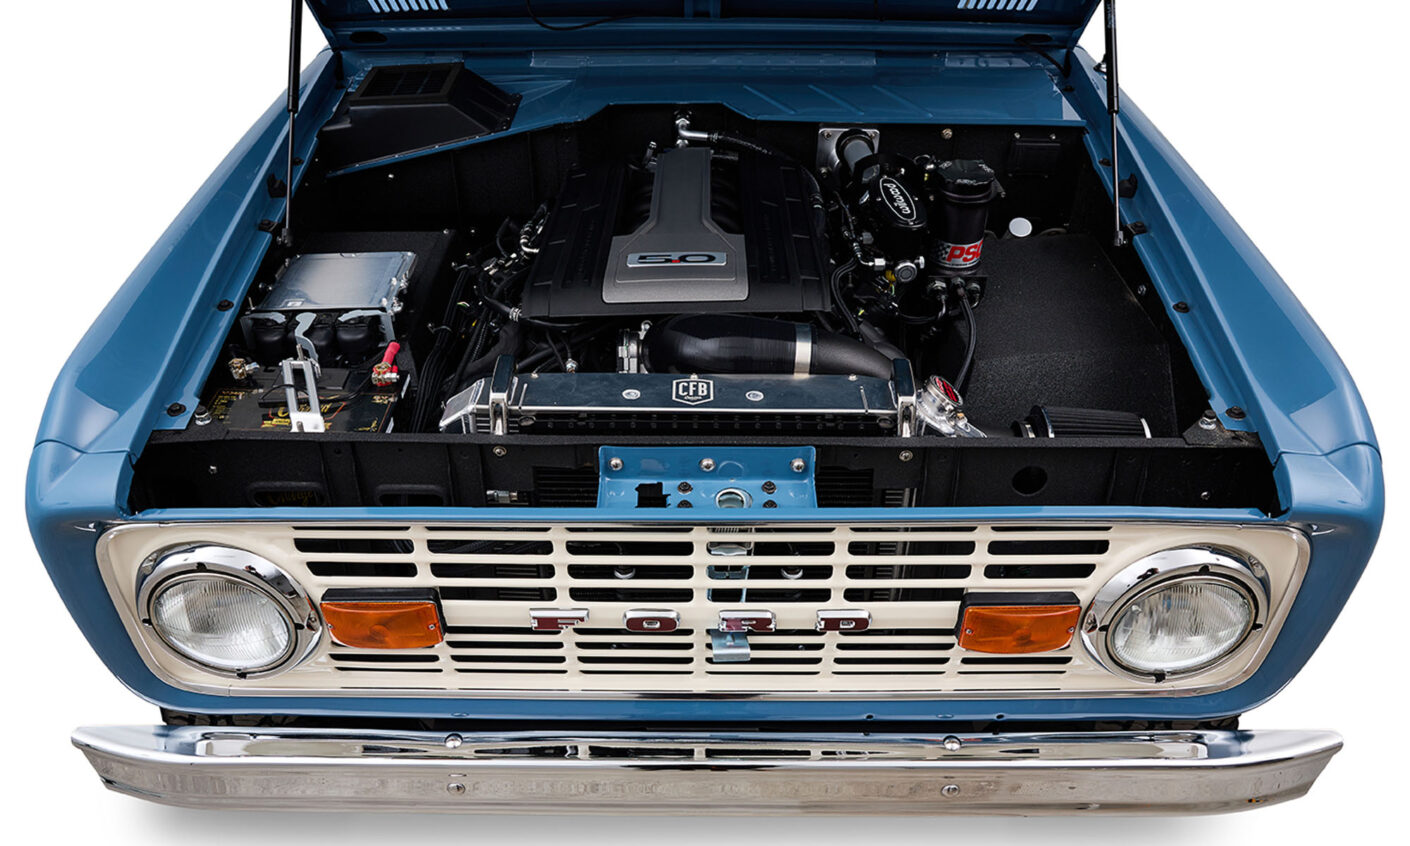 3rd generation Ford Racing Coyote 5.0L engine